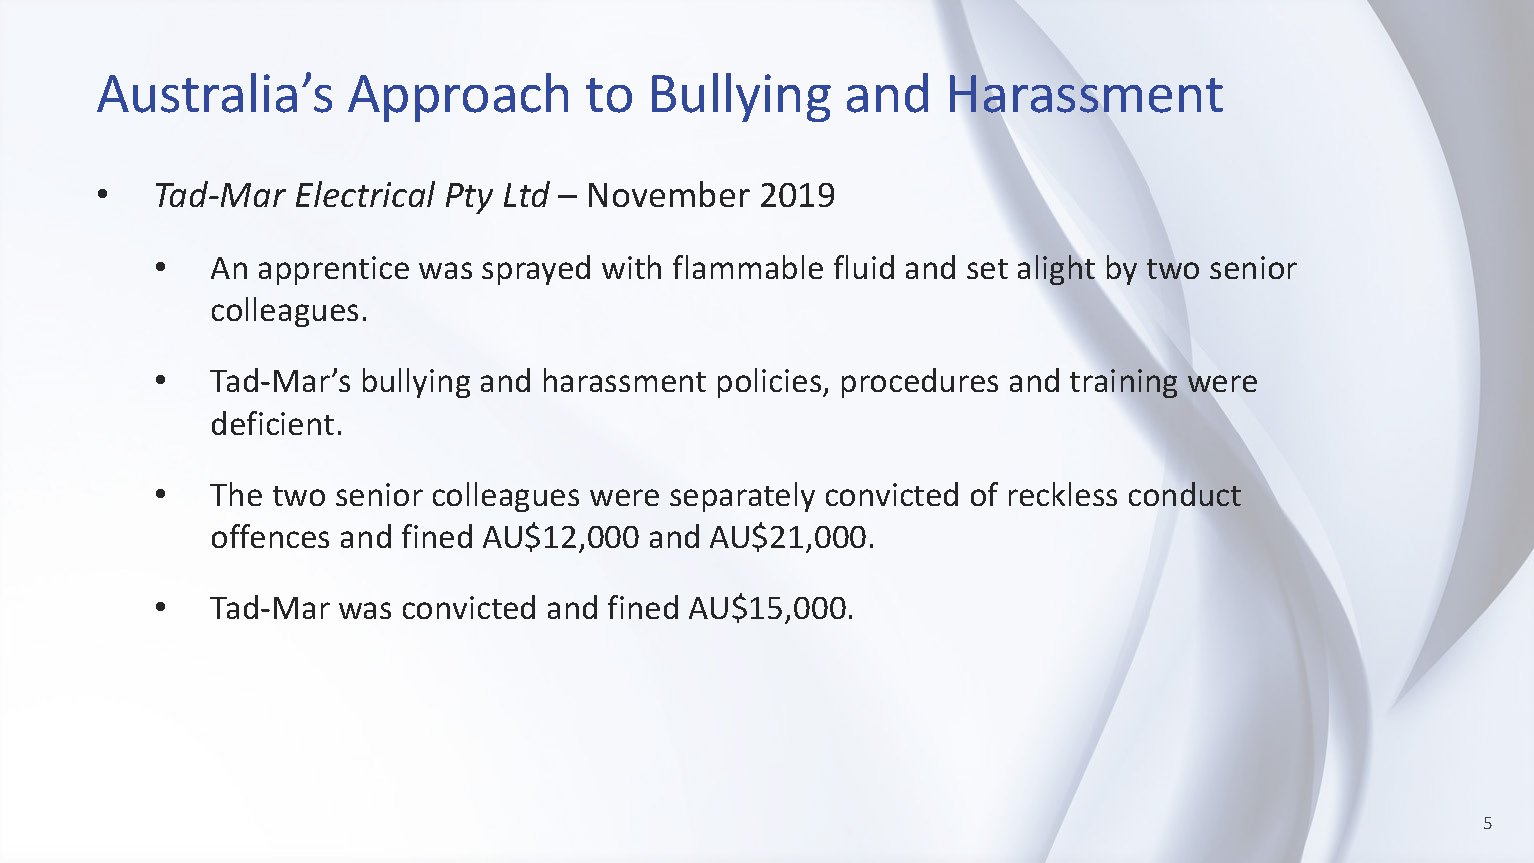 Workplace Bullying and Harassment – WorkSafe NZ’s Approach_Page_6.jpg